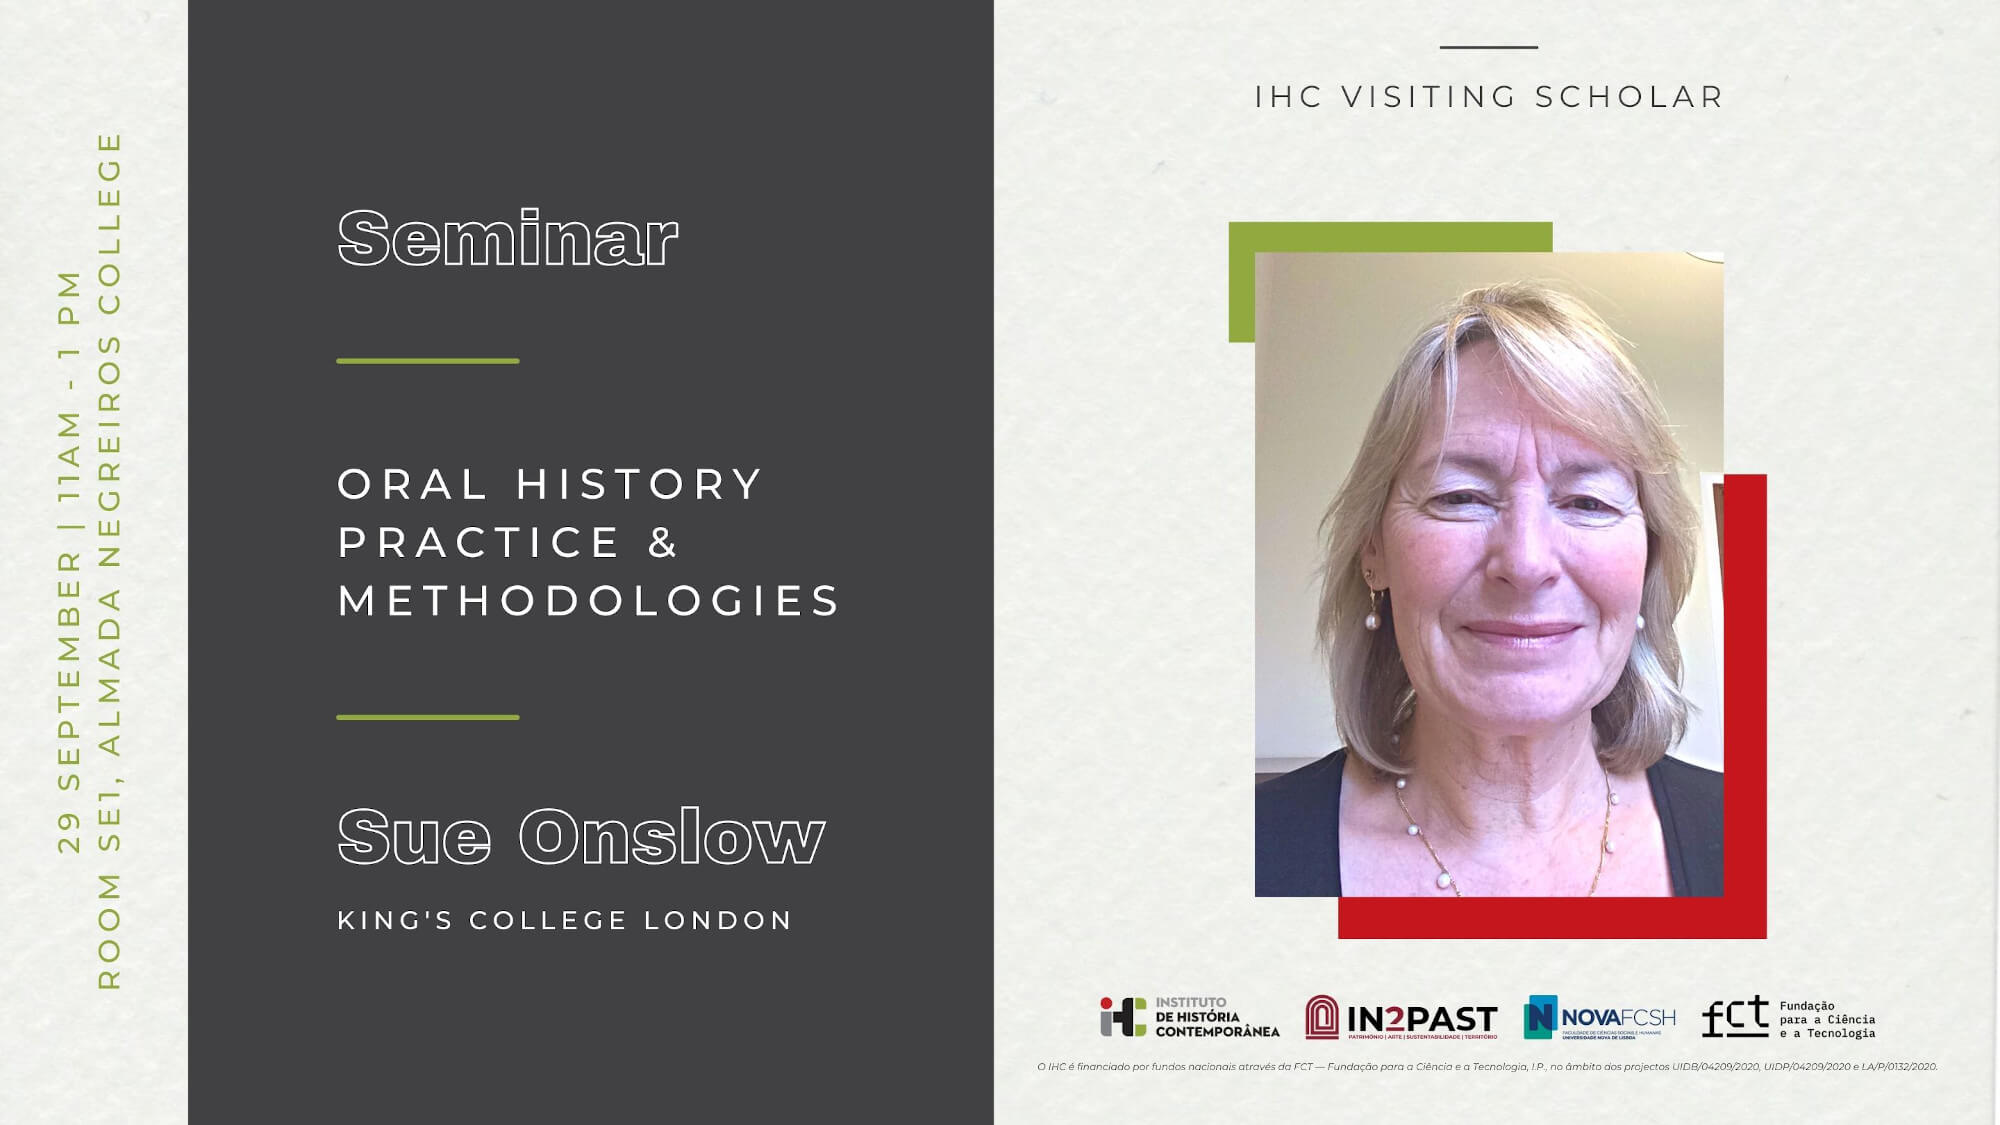 Poster of the seminar “Oral History Practice and Methodologies”, with Sue Onslow, from King’s College London. 29 September 2023, 11 AM to 1 PM, at Room SE1 of the Almada Negreiros College. The poster includes a picture of Sue Onslow, indicating she’s an IHC Visiting Scholar.